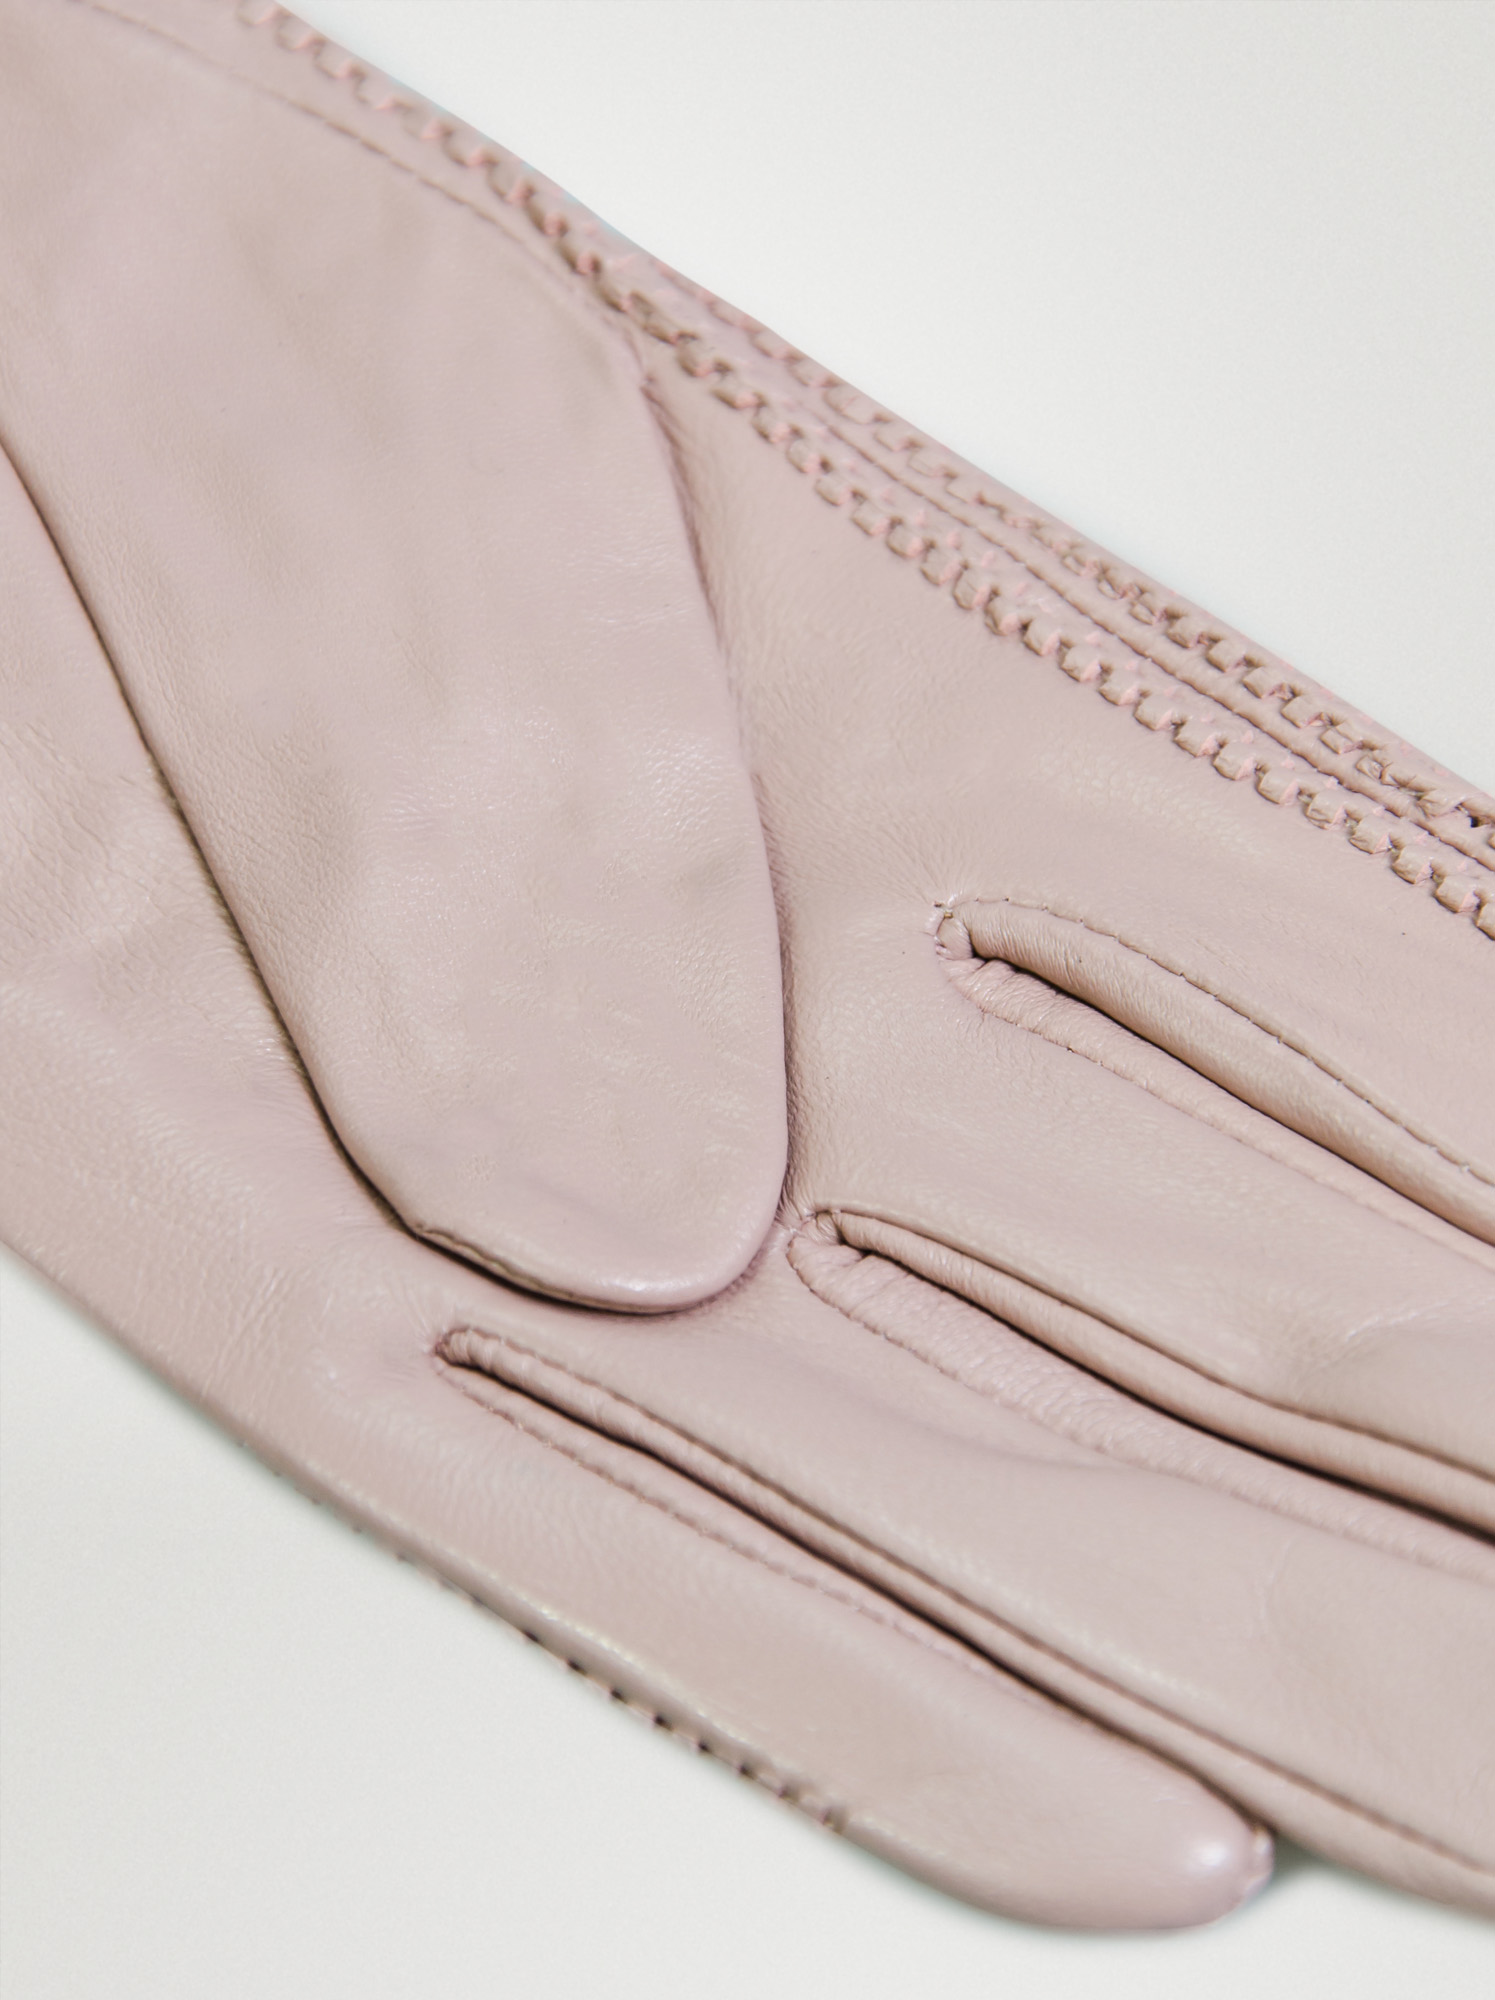 Pink leather gloves - Allora image 4